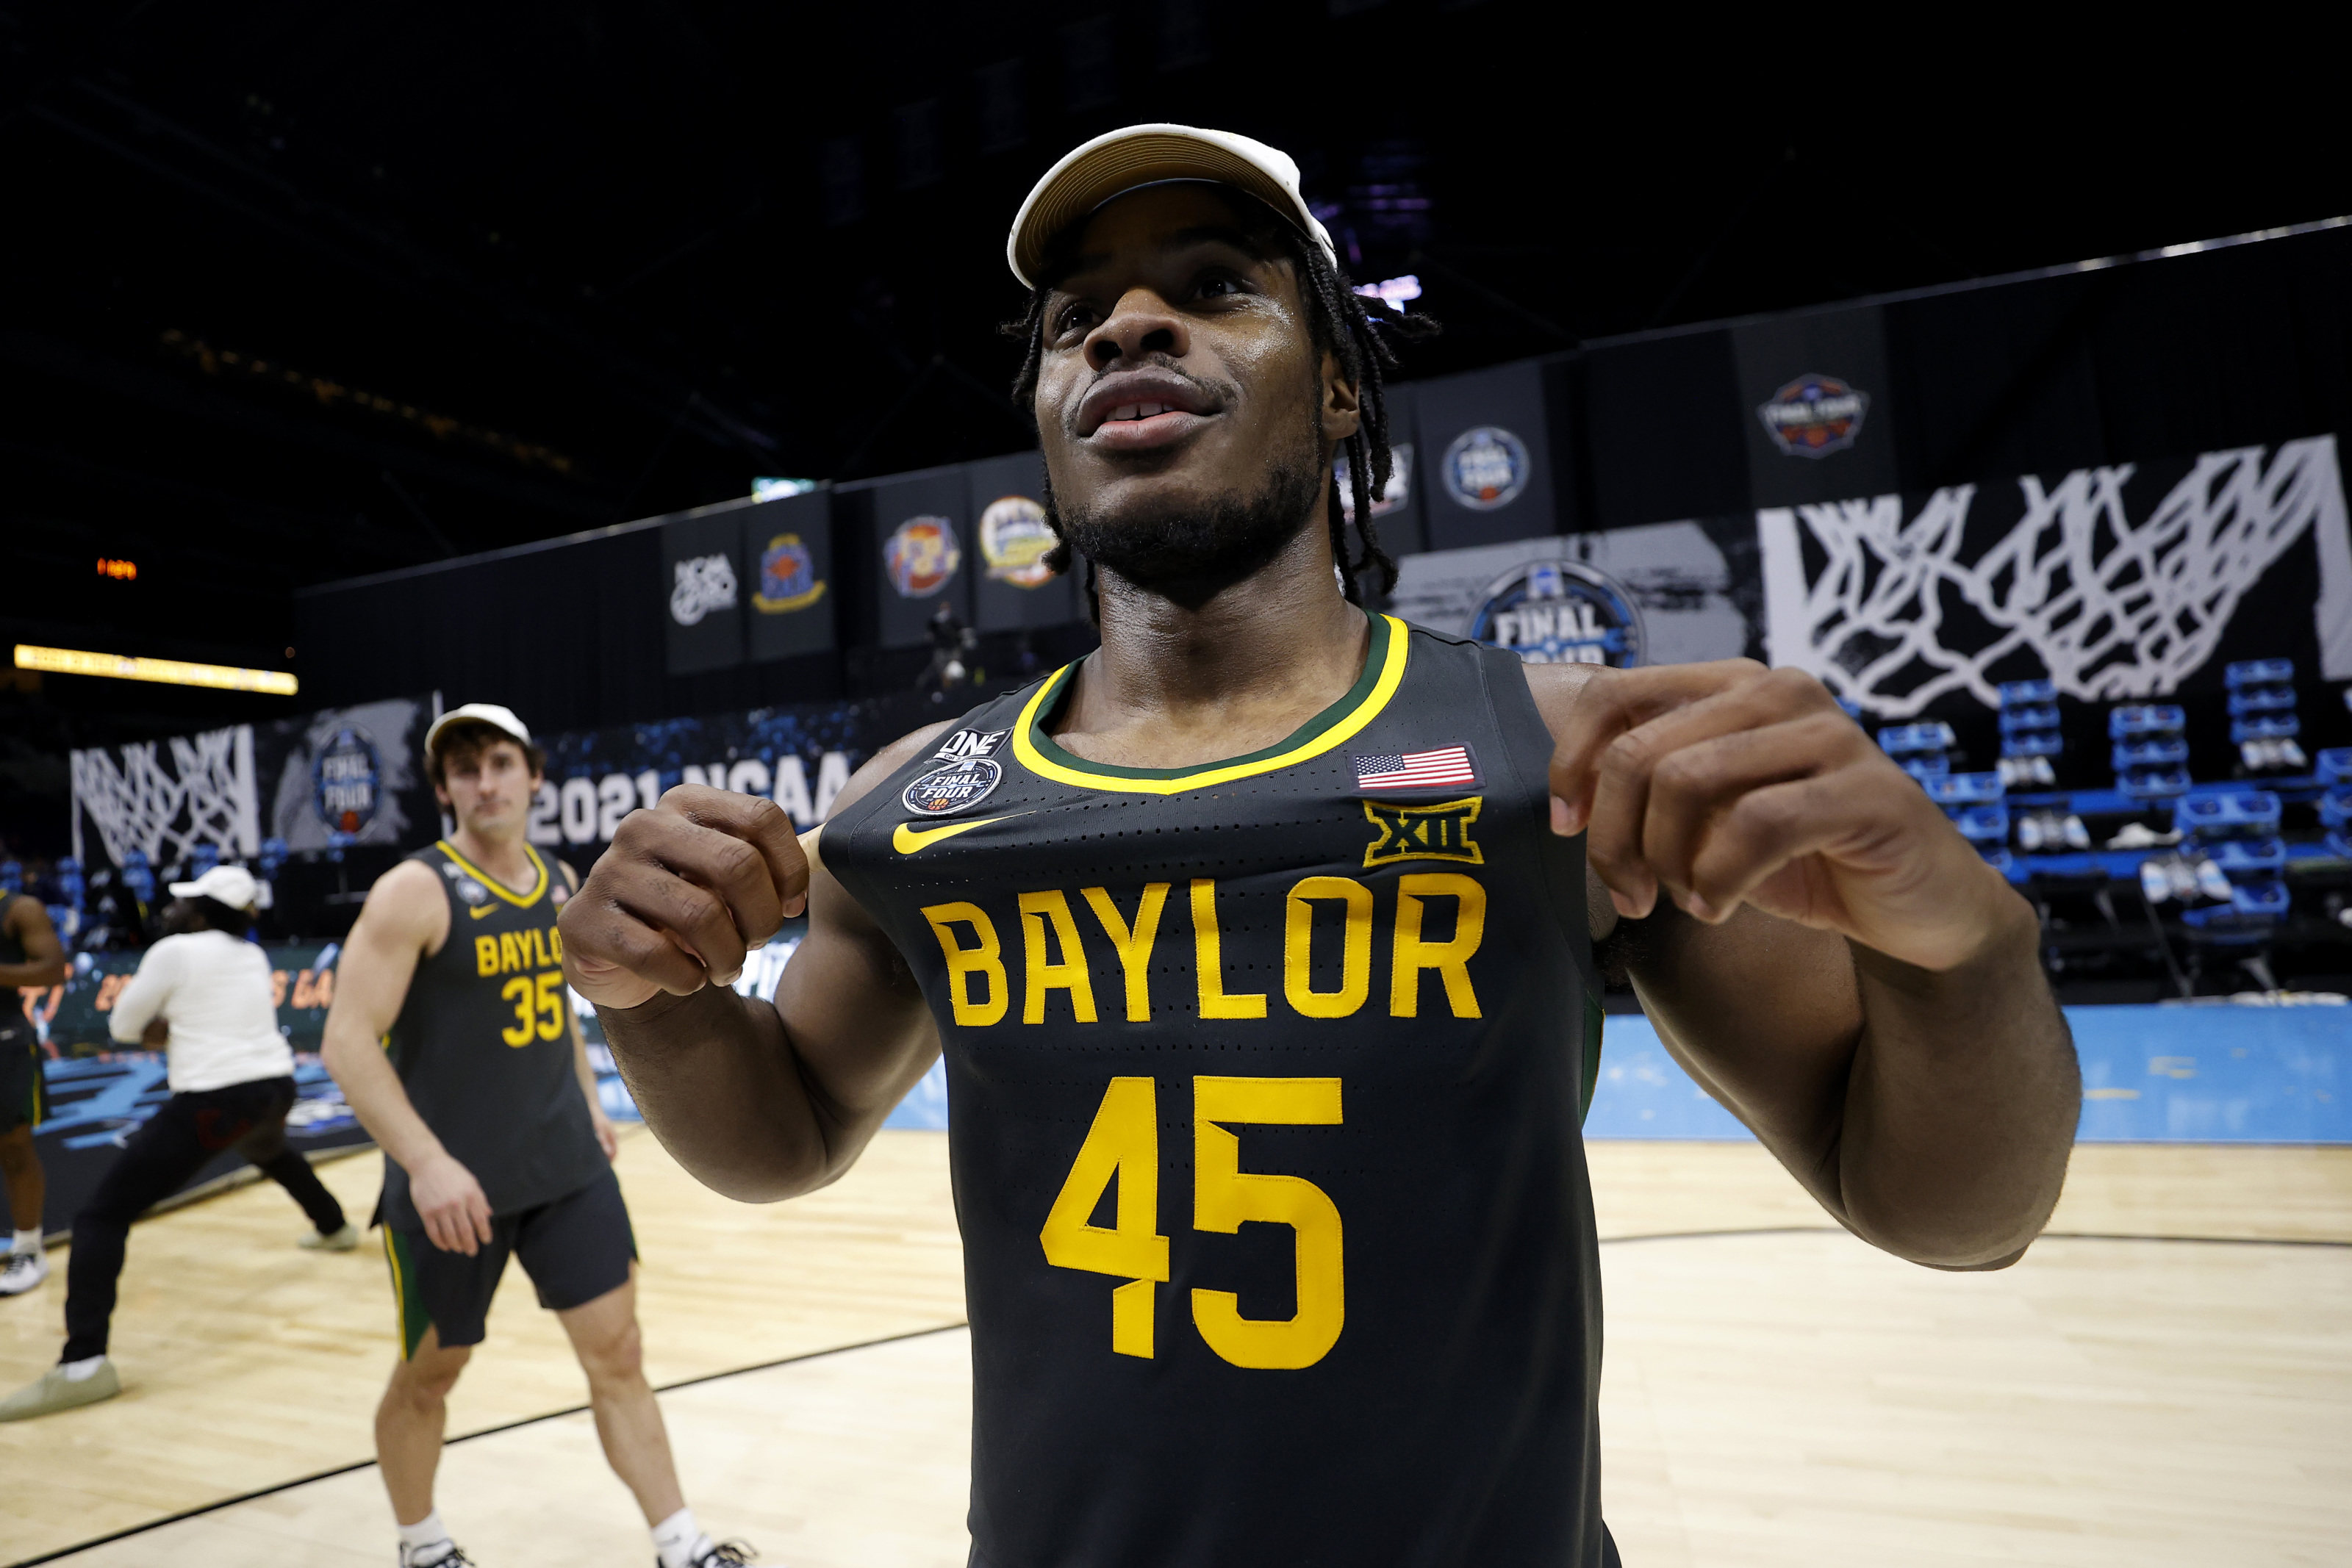 Baylor's Davion Mitchell sweeps defensive player of year awards